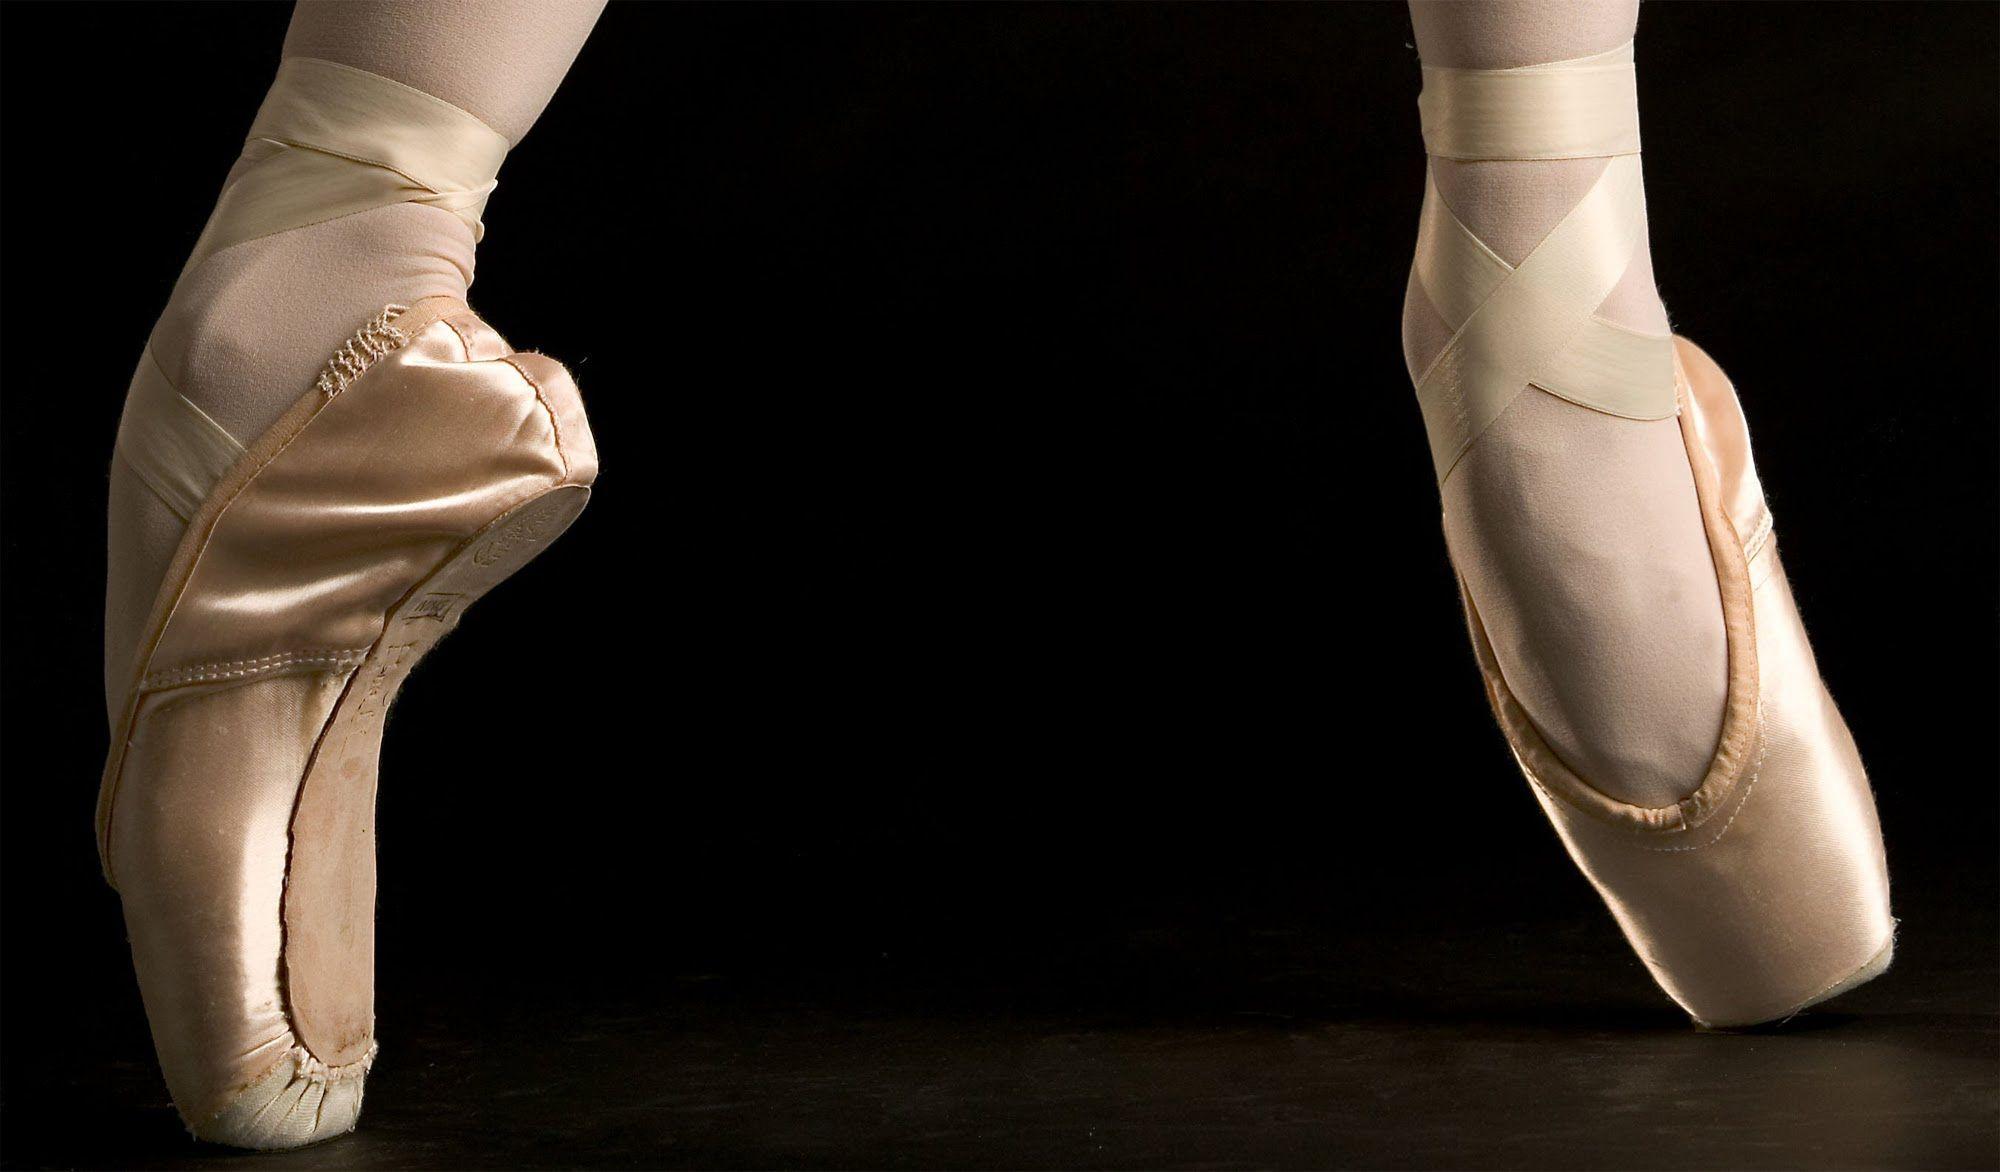 The Royal Ballet From The Perspective Of A Pointe Shoe Go Pro